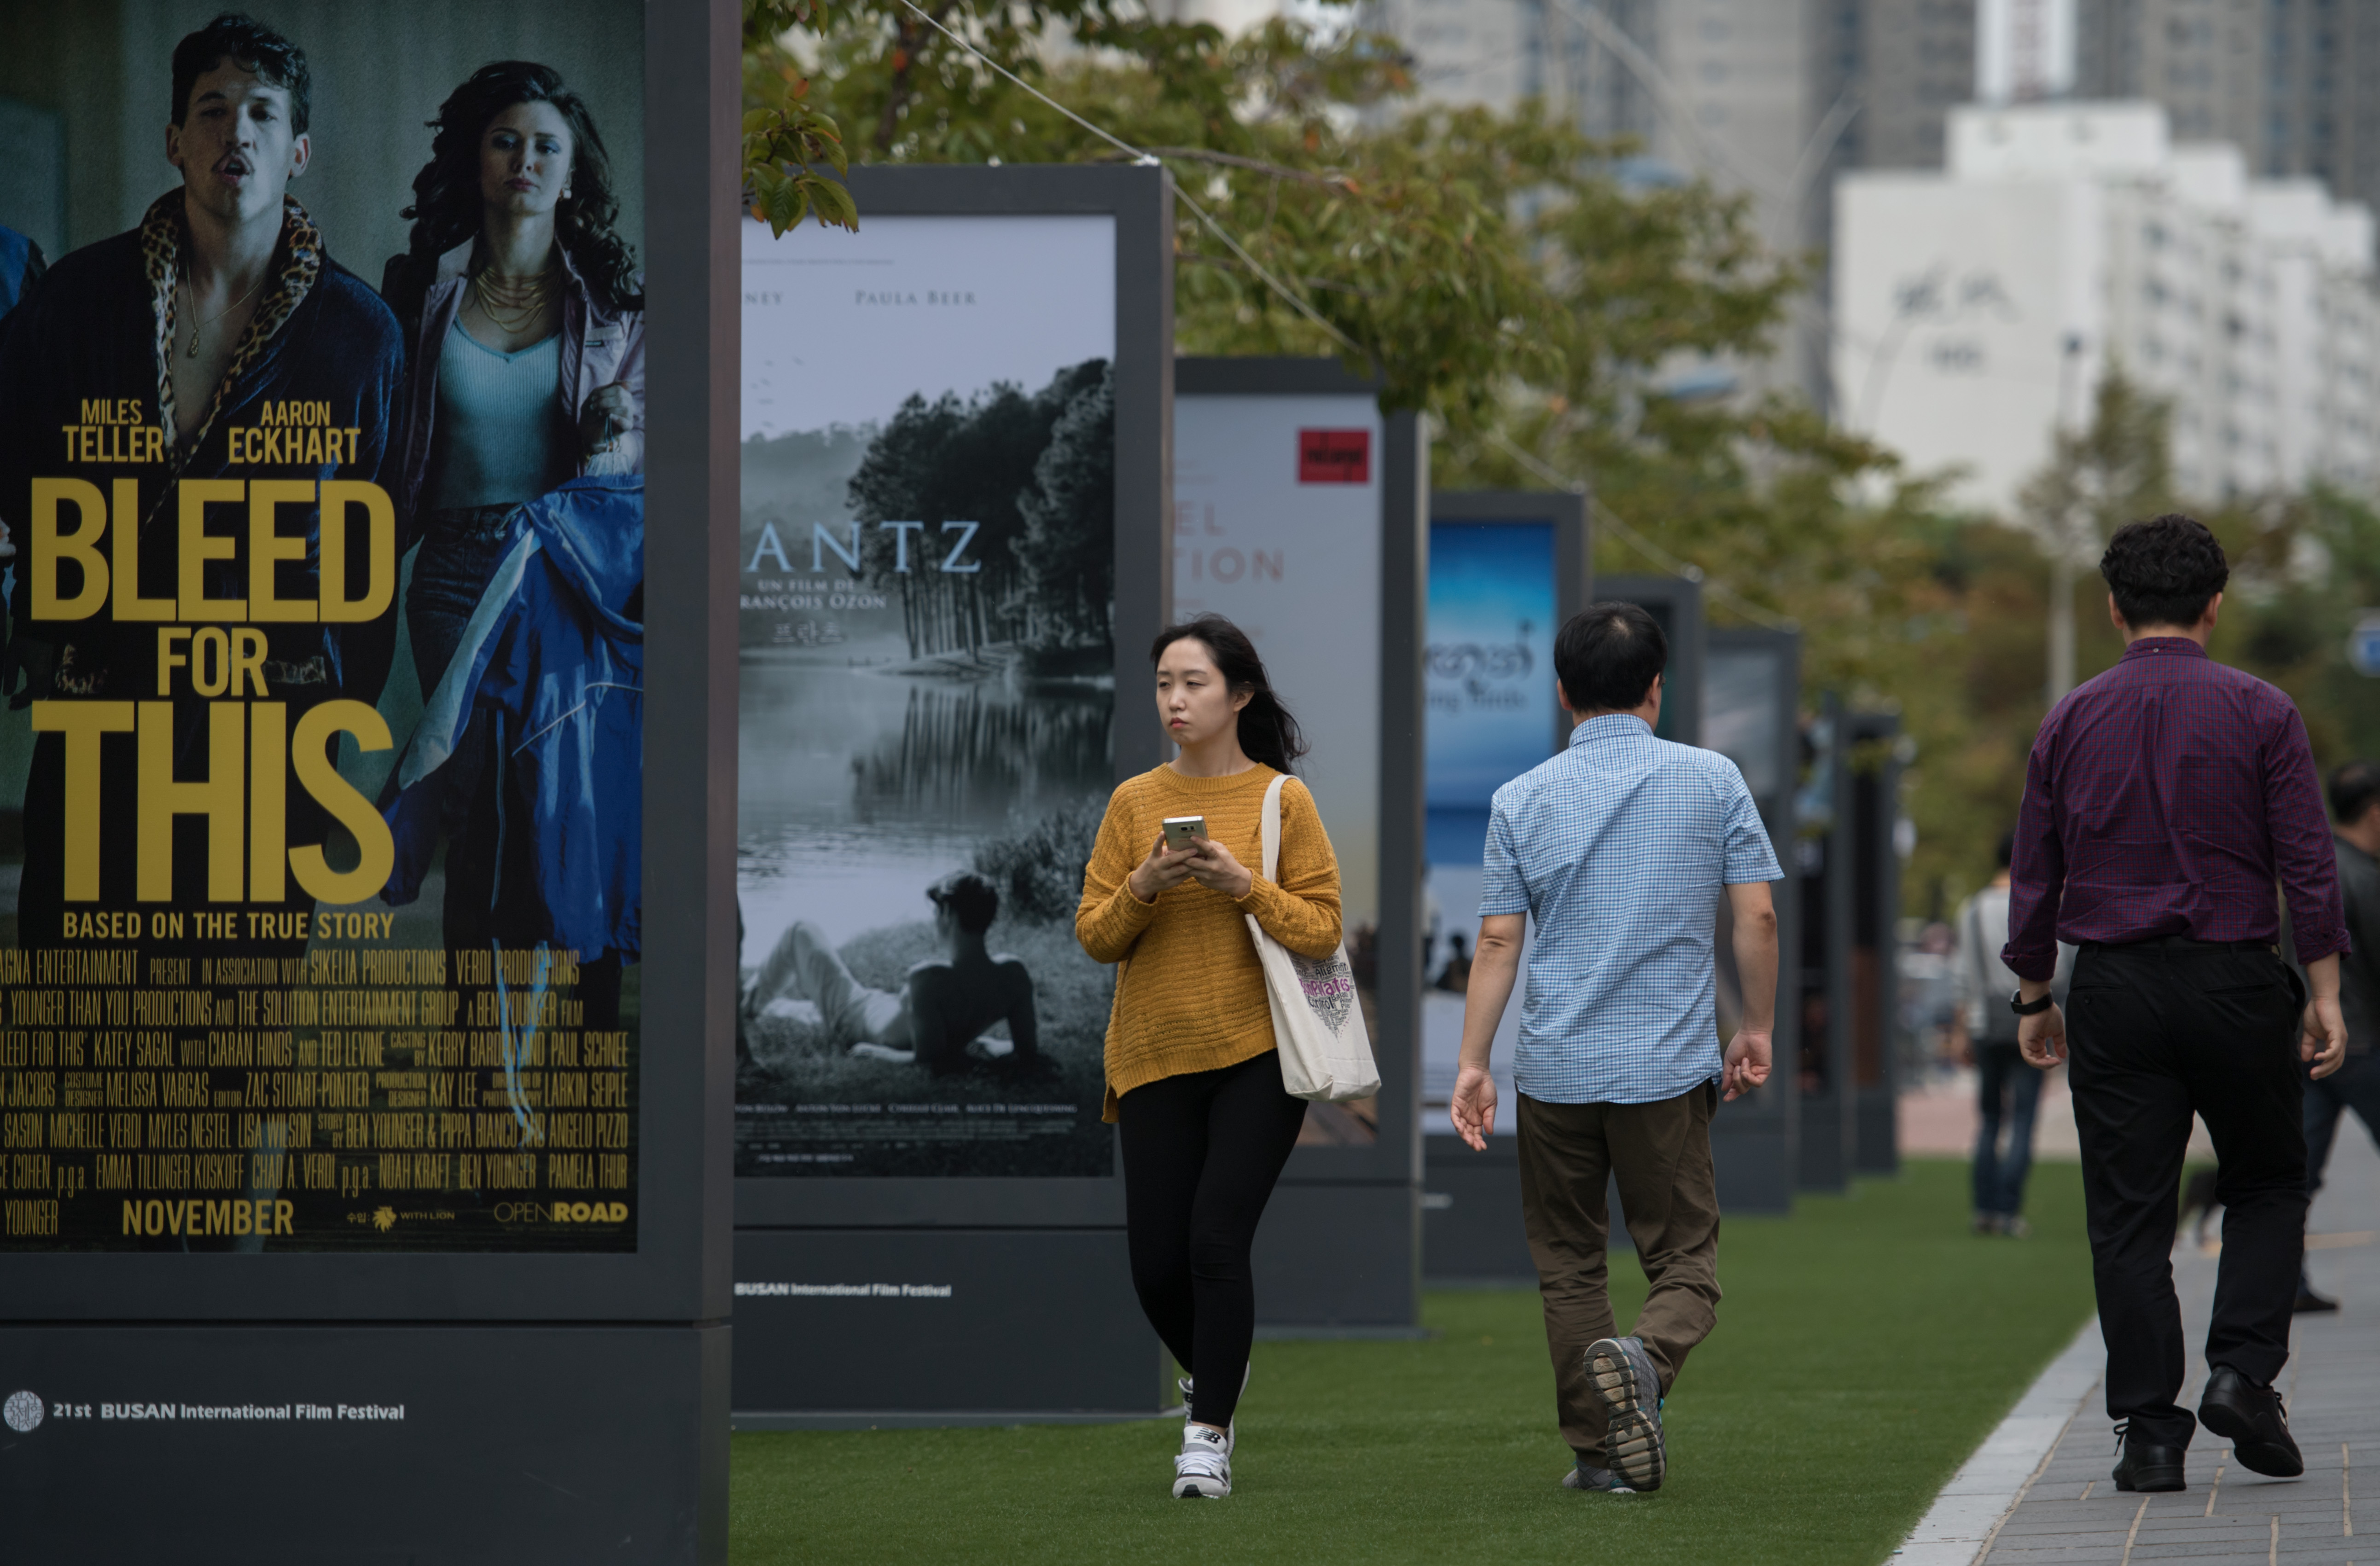 Film posters are displayed during the 21st Busan International Film Festival (BIFF) in Busan on October 7, 2016. The curtain has been raised on a star-studded 21st Busan International Film Festival (BIFF) after two years of political infighting had threatened to derail the premier event of its kind in Asia. / AFP PHOTO / Ed JONES The curtain has been raised on a star-studded 21st Busan International Film Festival (BIFF) after two years of political infighting had threatened to derail the premier event of its kind in Asia. / AFP PHOTO / ED JONES